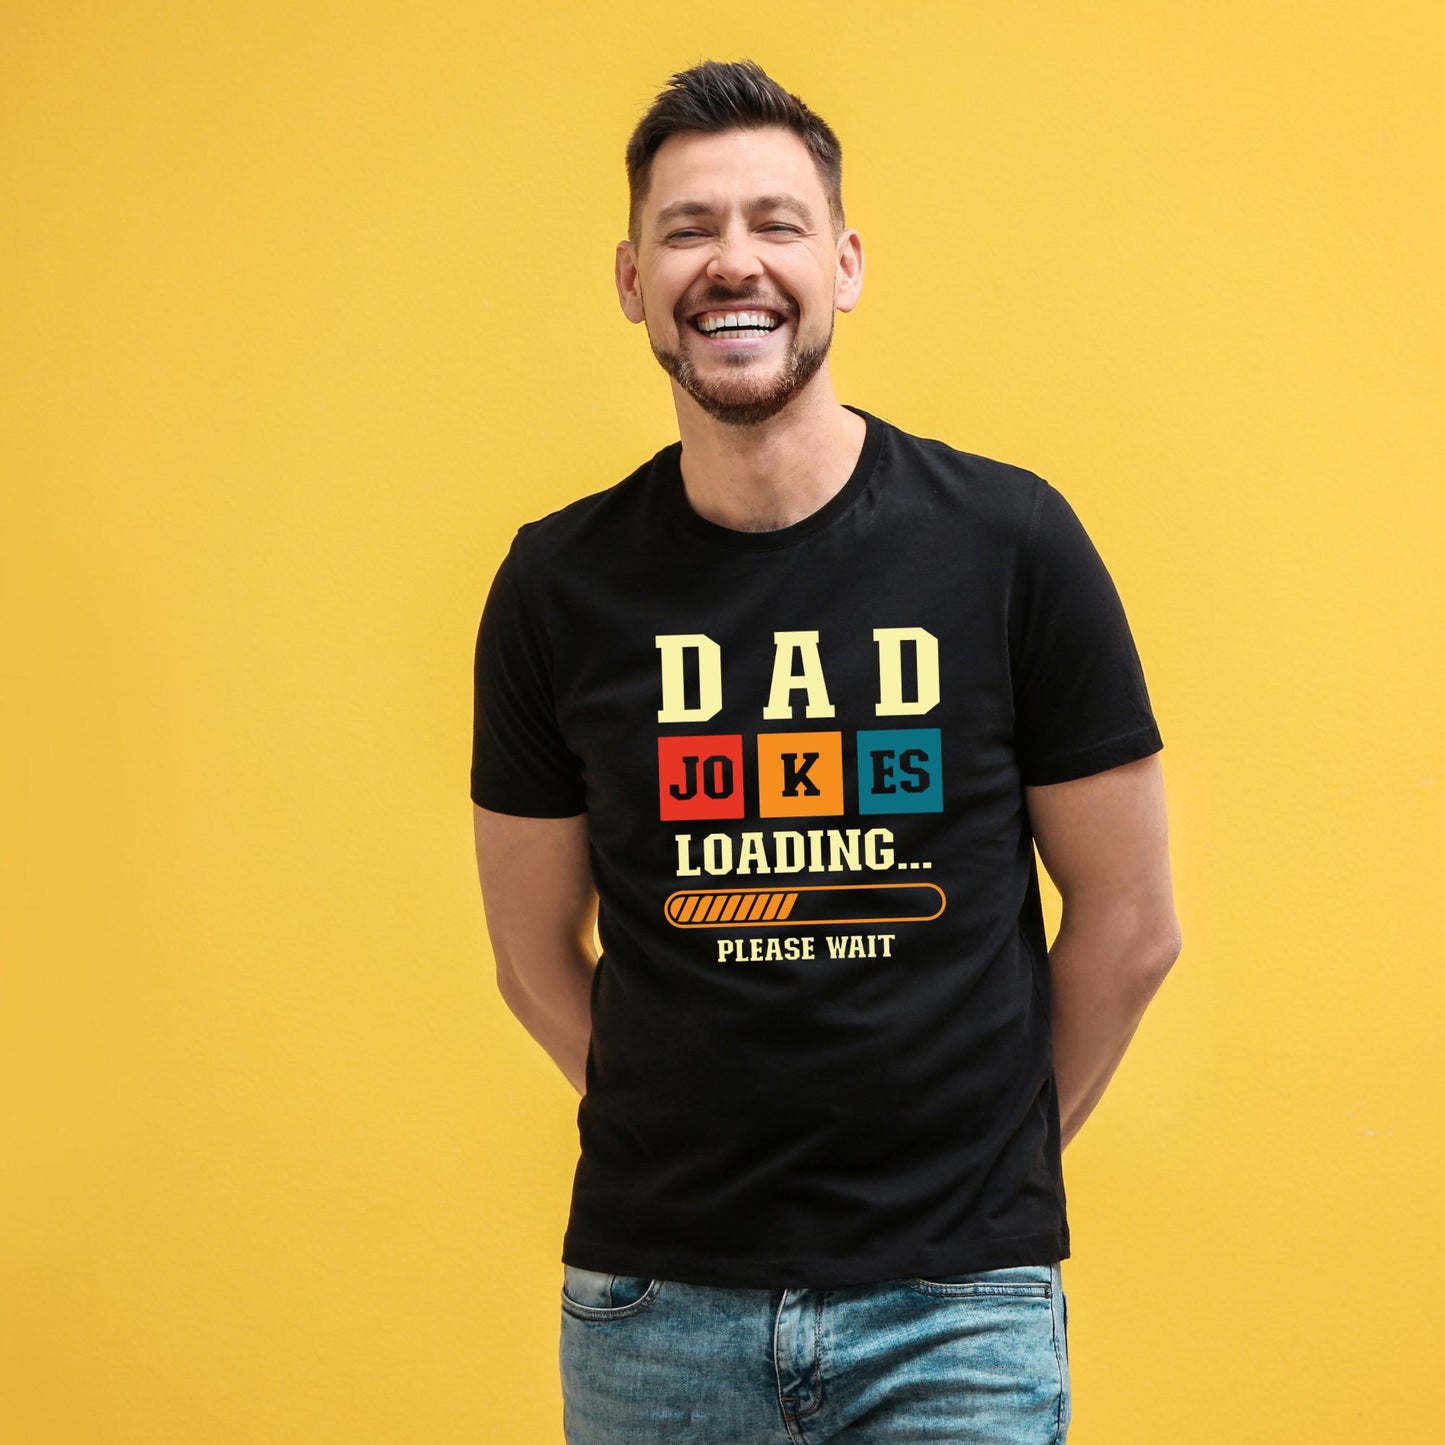 "Dad Jokes Loading" Funny T-Shirt for Father's Day Gift